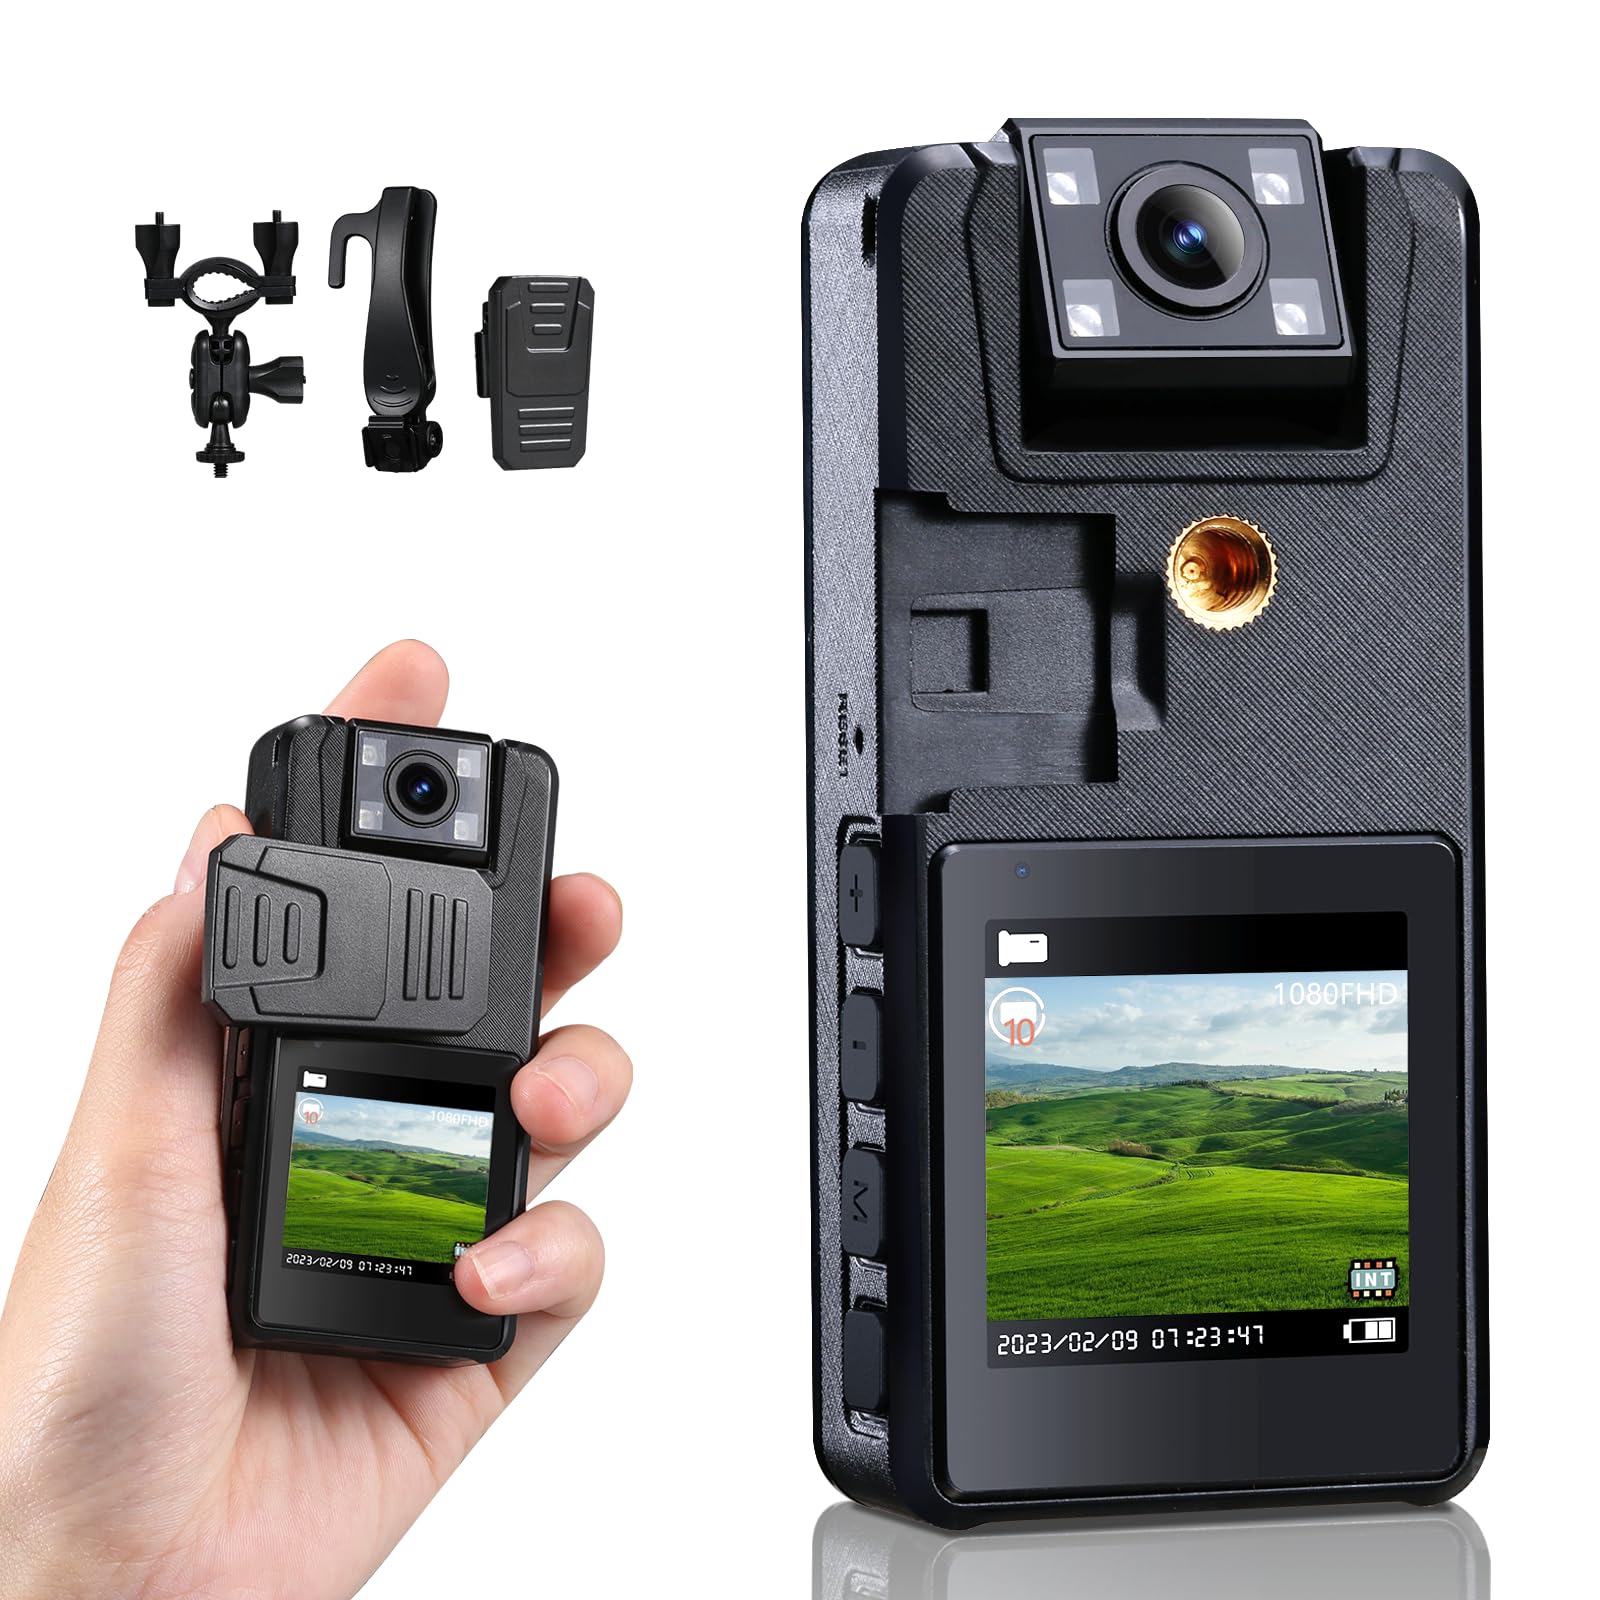 Hoestr 64GB Body Camera, 1296P Body Cam (2500mAh) with IR Night Vision, 180° Rotatable Lens and 3 Sturdy Clips, Camcorder with Audio and Video Recording, Ideal for Police Civilians Hikers Cyclists